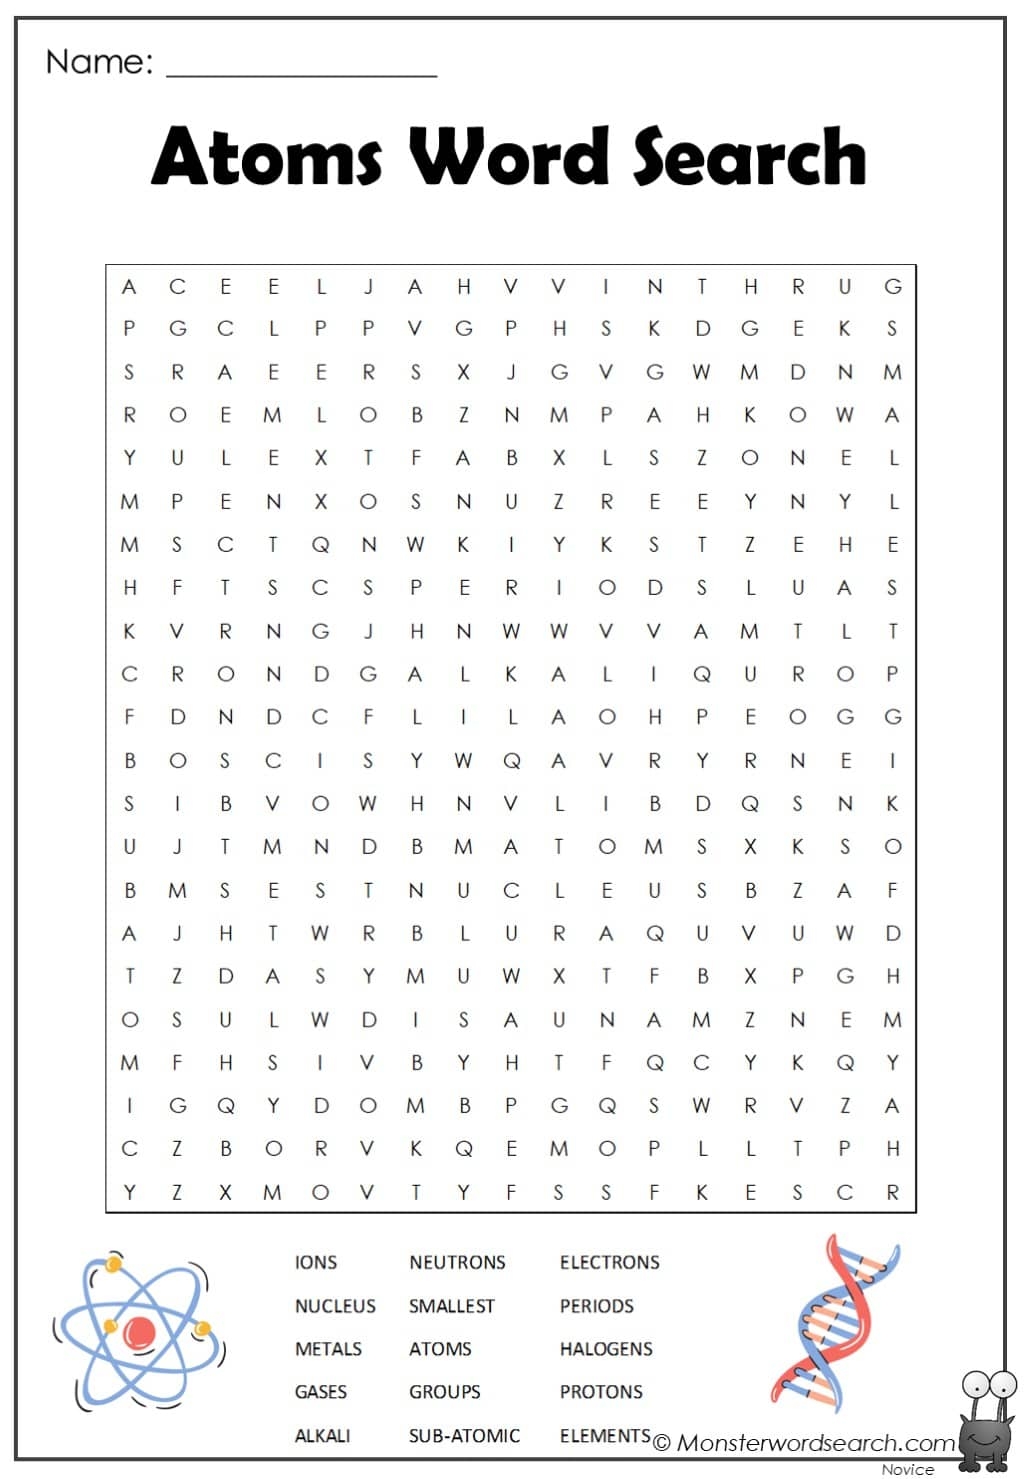 Atoms Word Search Puzzle Answers Key